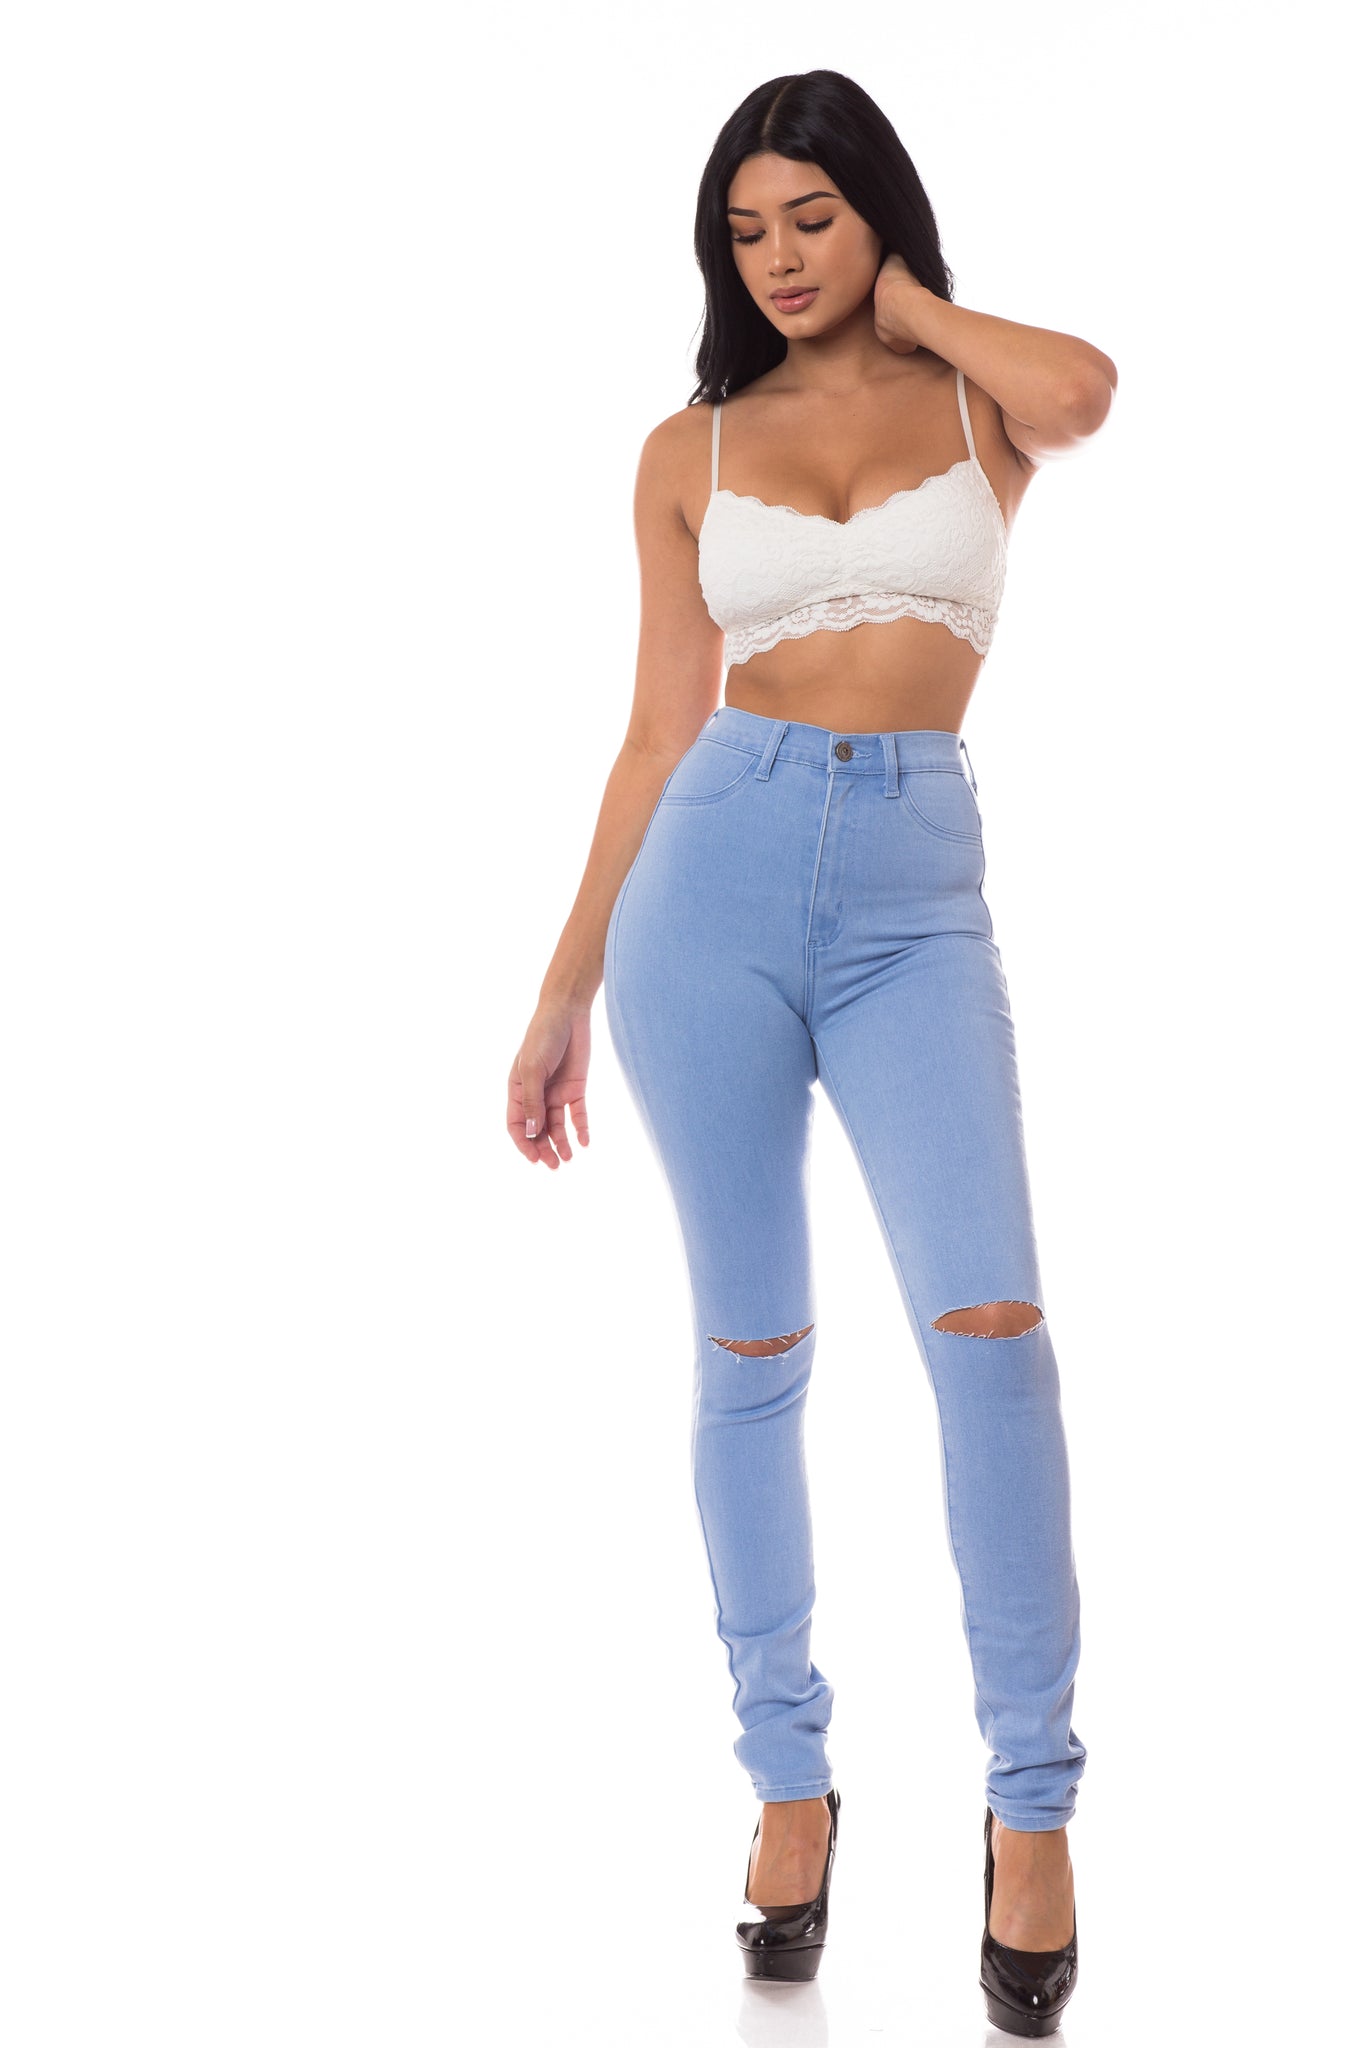 women full length skinny super high rise high waisted distressed jeans pants